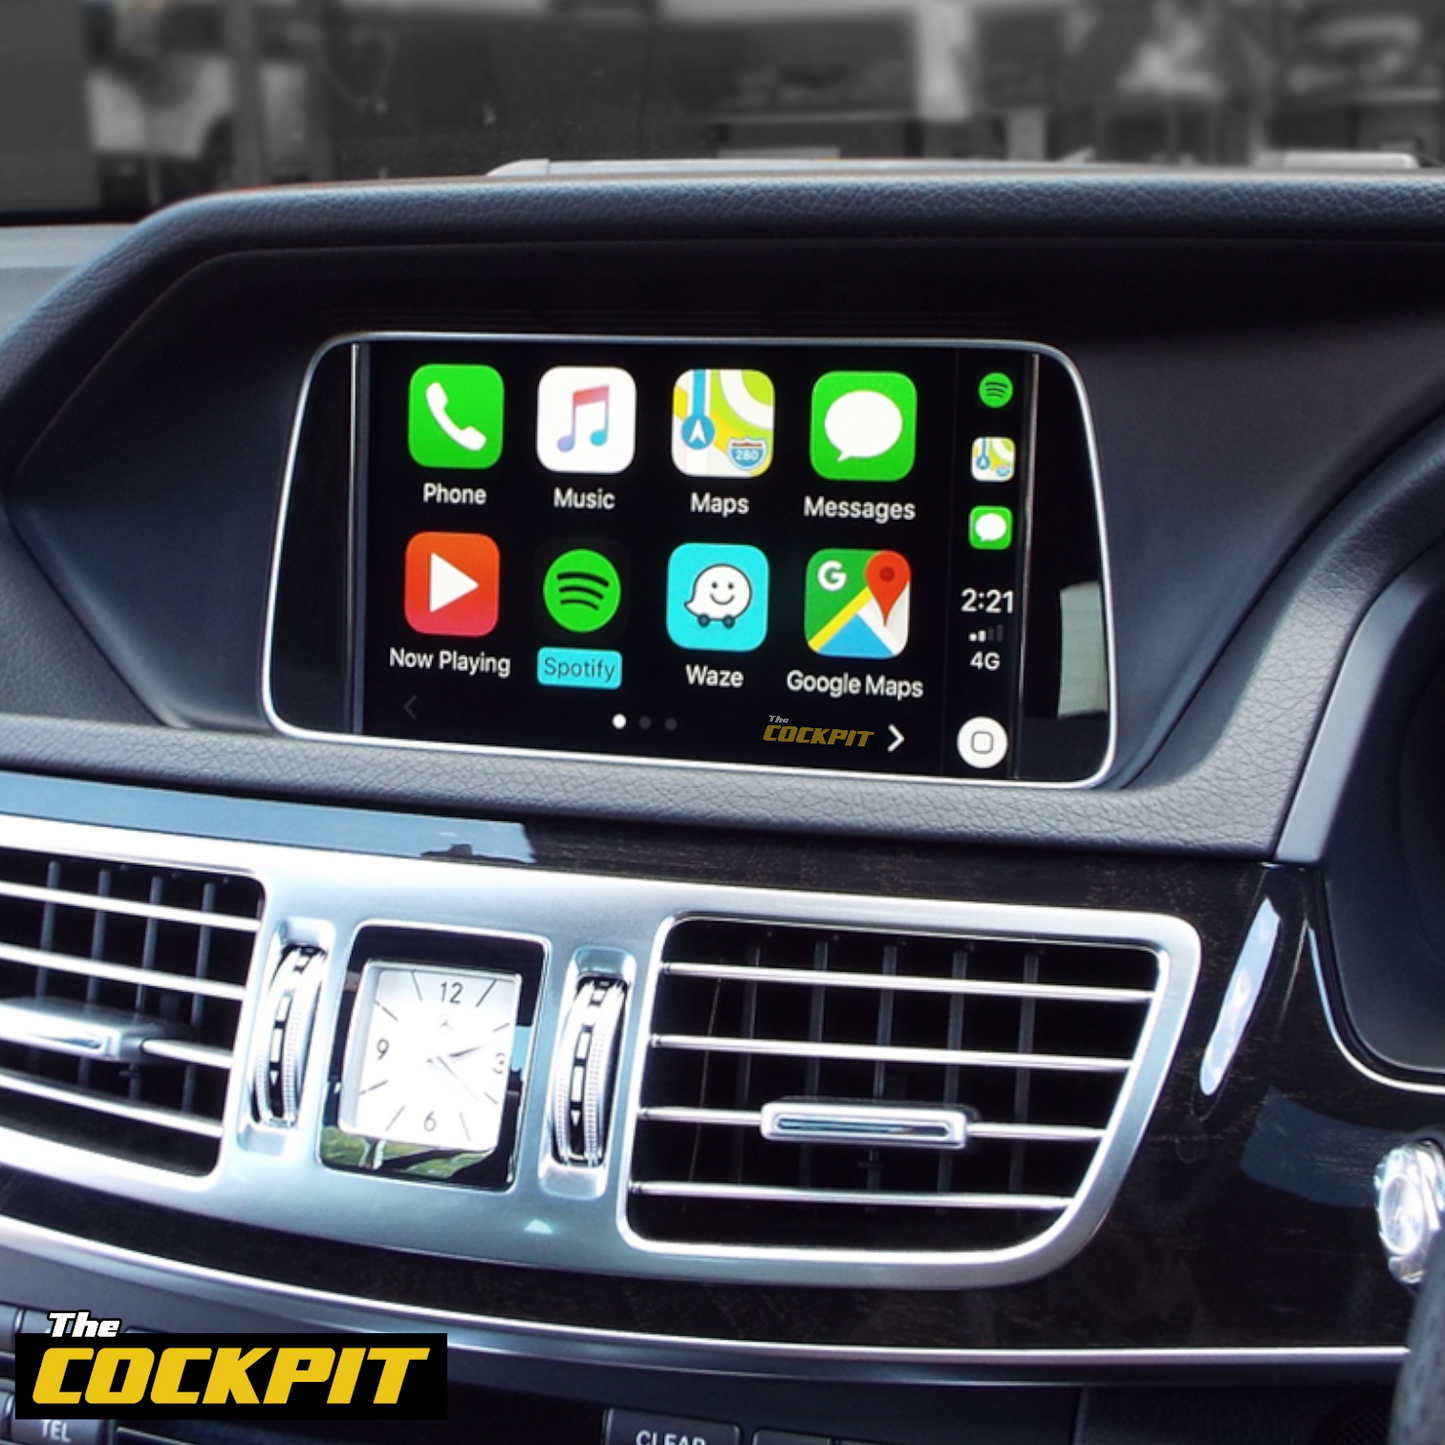 MERCEDES E CLASS W212 APPLE CARPLAY AND ANDROID AUTO INTERFACE